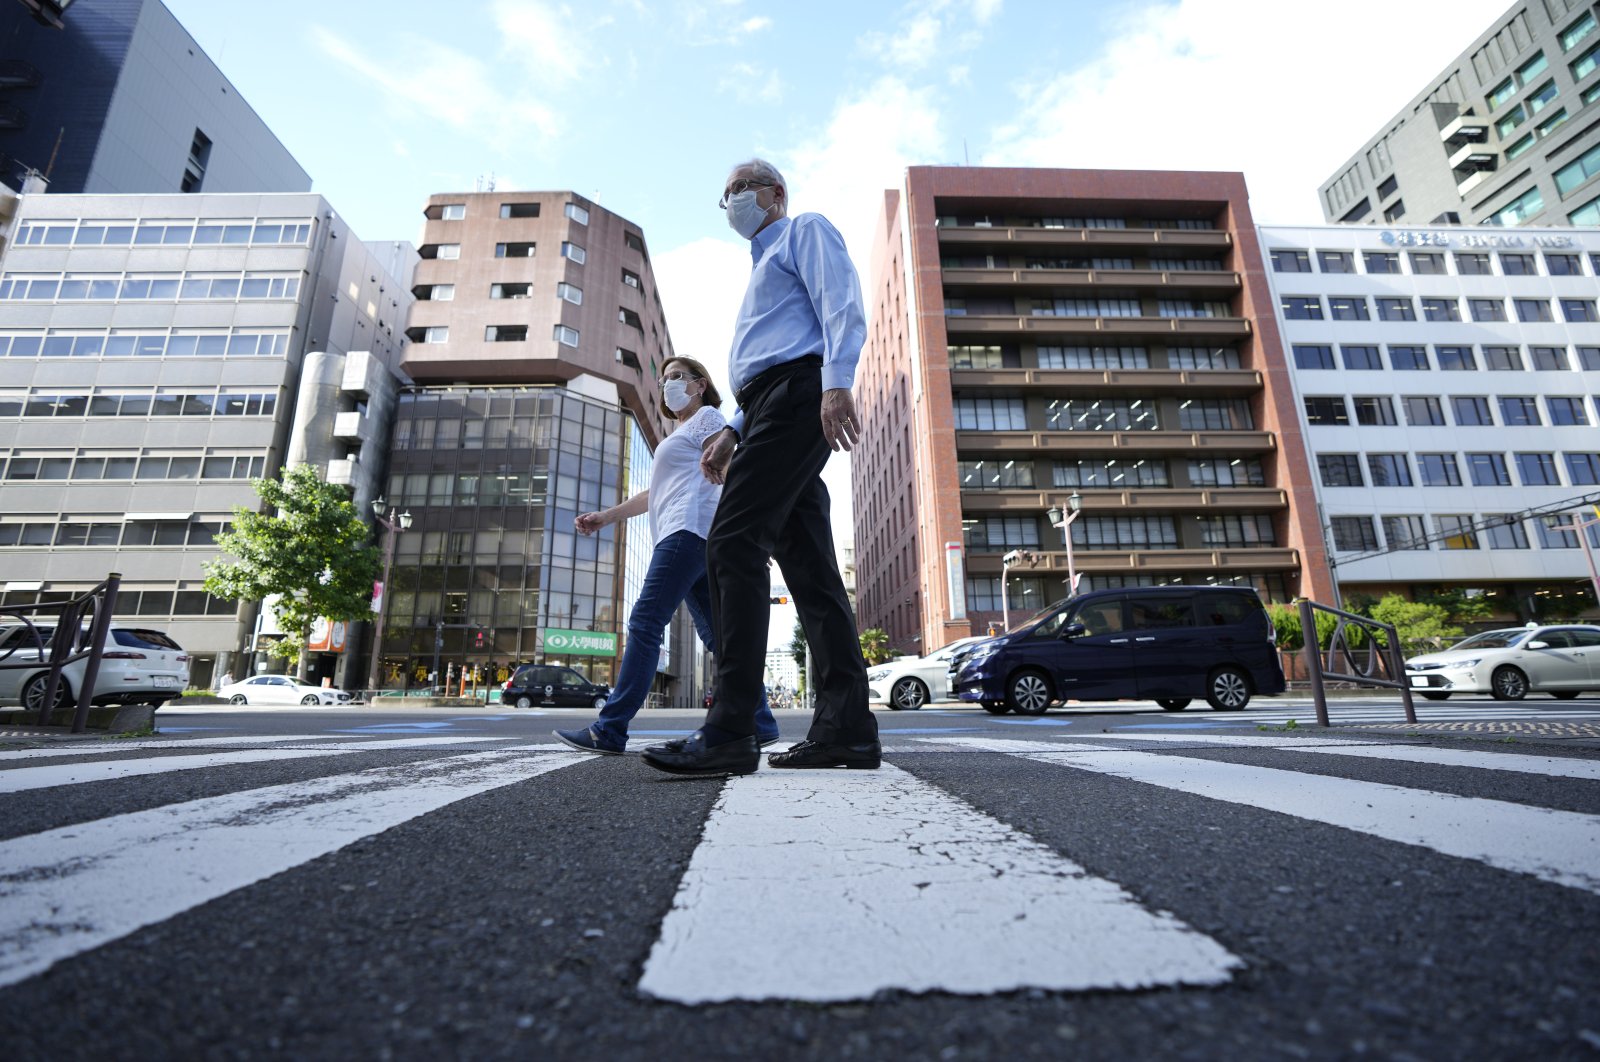 Former Nissan Motor Co. executive Greg Kelly and his wife, Dee Kelly, go for a walk in Tokyo, Japan, Aug. 18, 2021. (AP Photo)